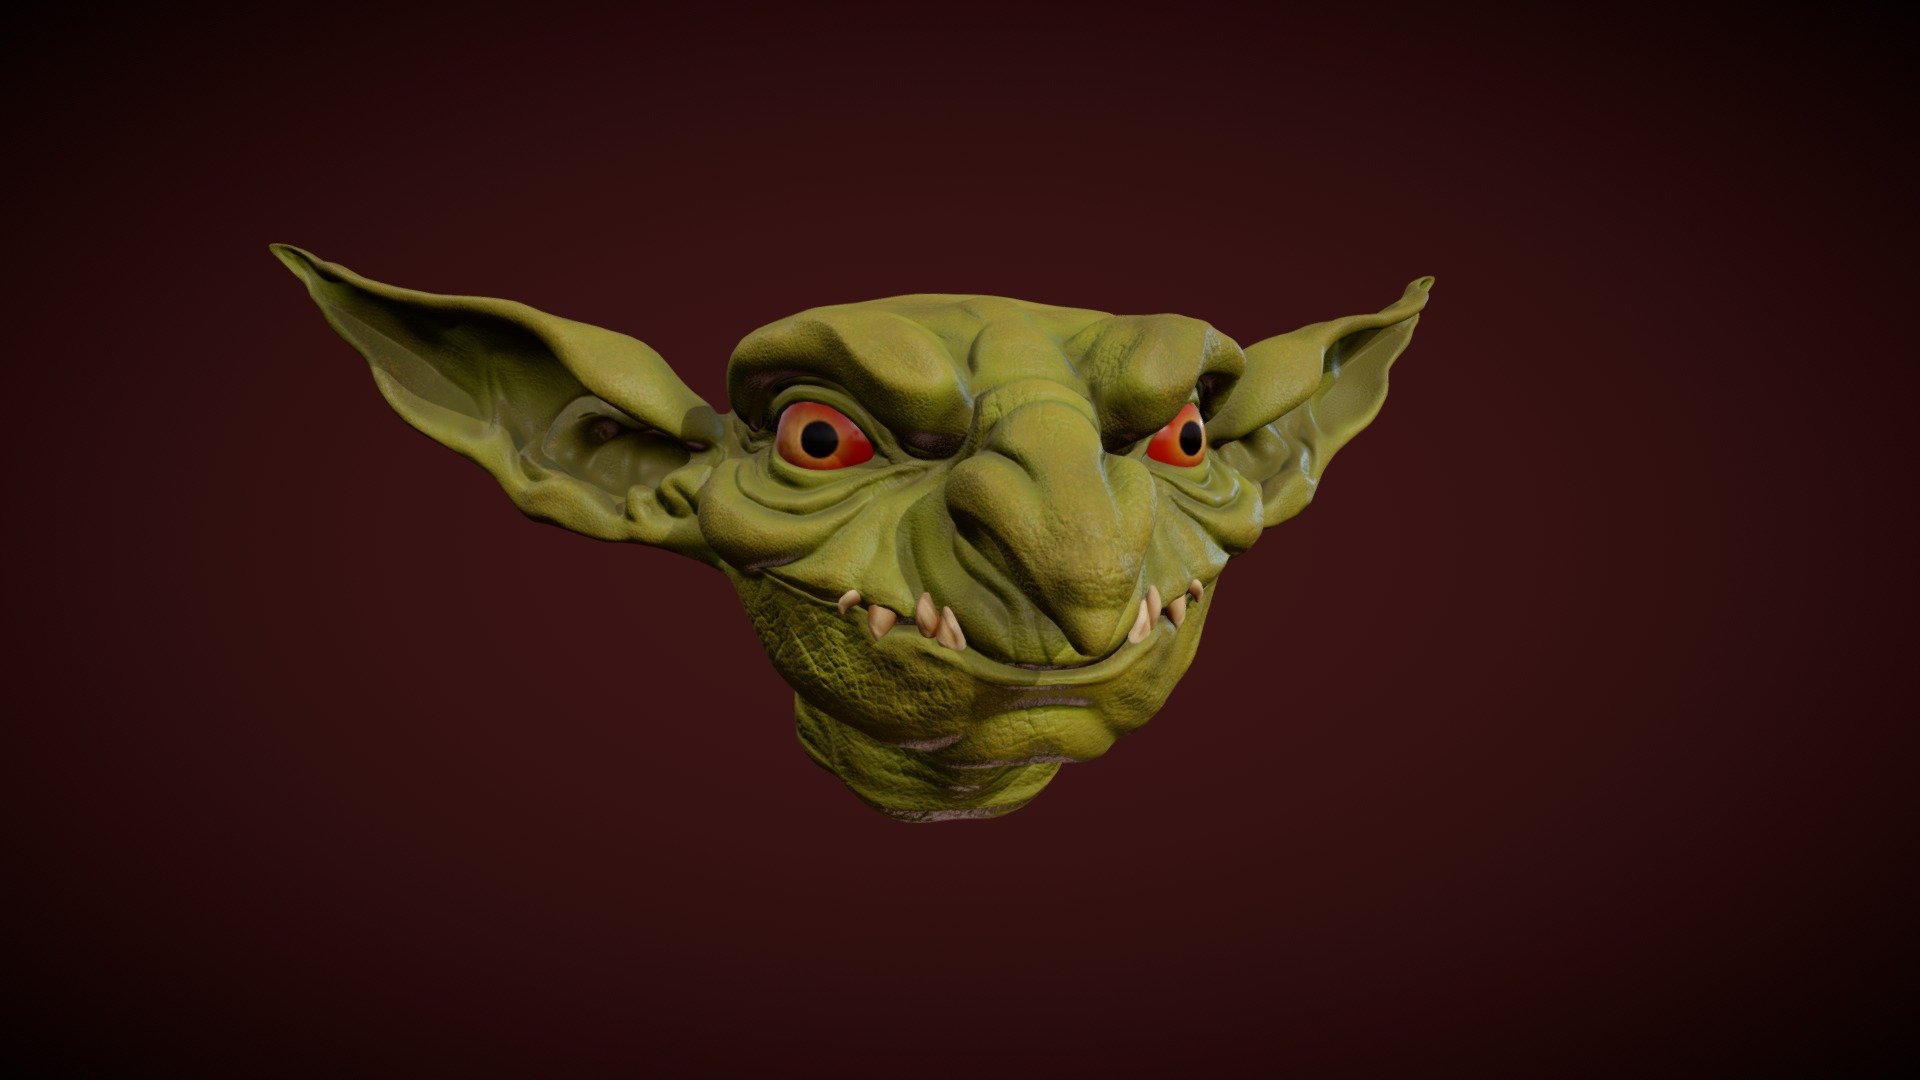 Filthy Goblin Head, my first post where I wanted to combine my practice of sculpting, baking and texturing, enjoy :)

Based on generated image by Eric Bellefeuille - https://www.artstation.com/artwork/vDzg2O - Goblin - 3D model by Basil Gilles (@wirako) 3d model